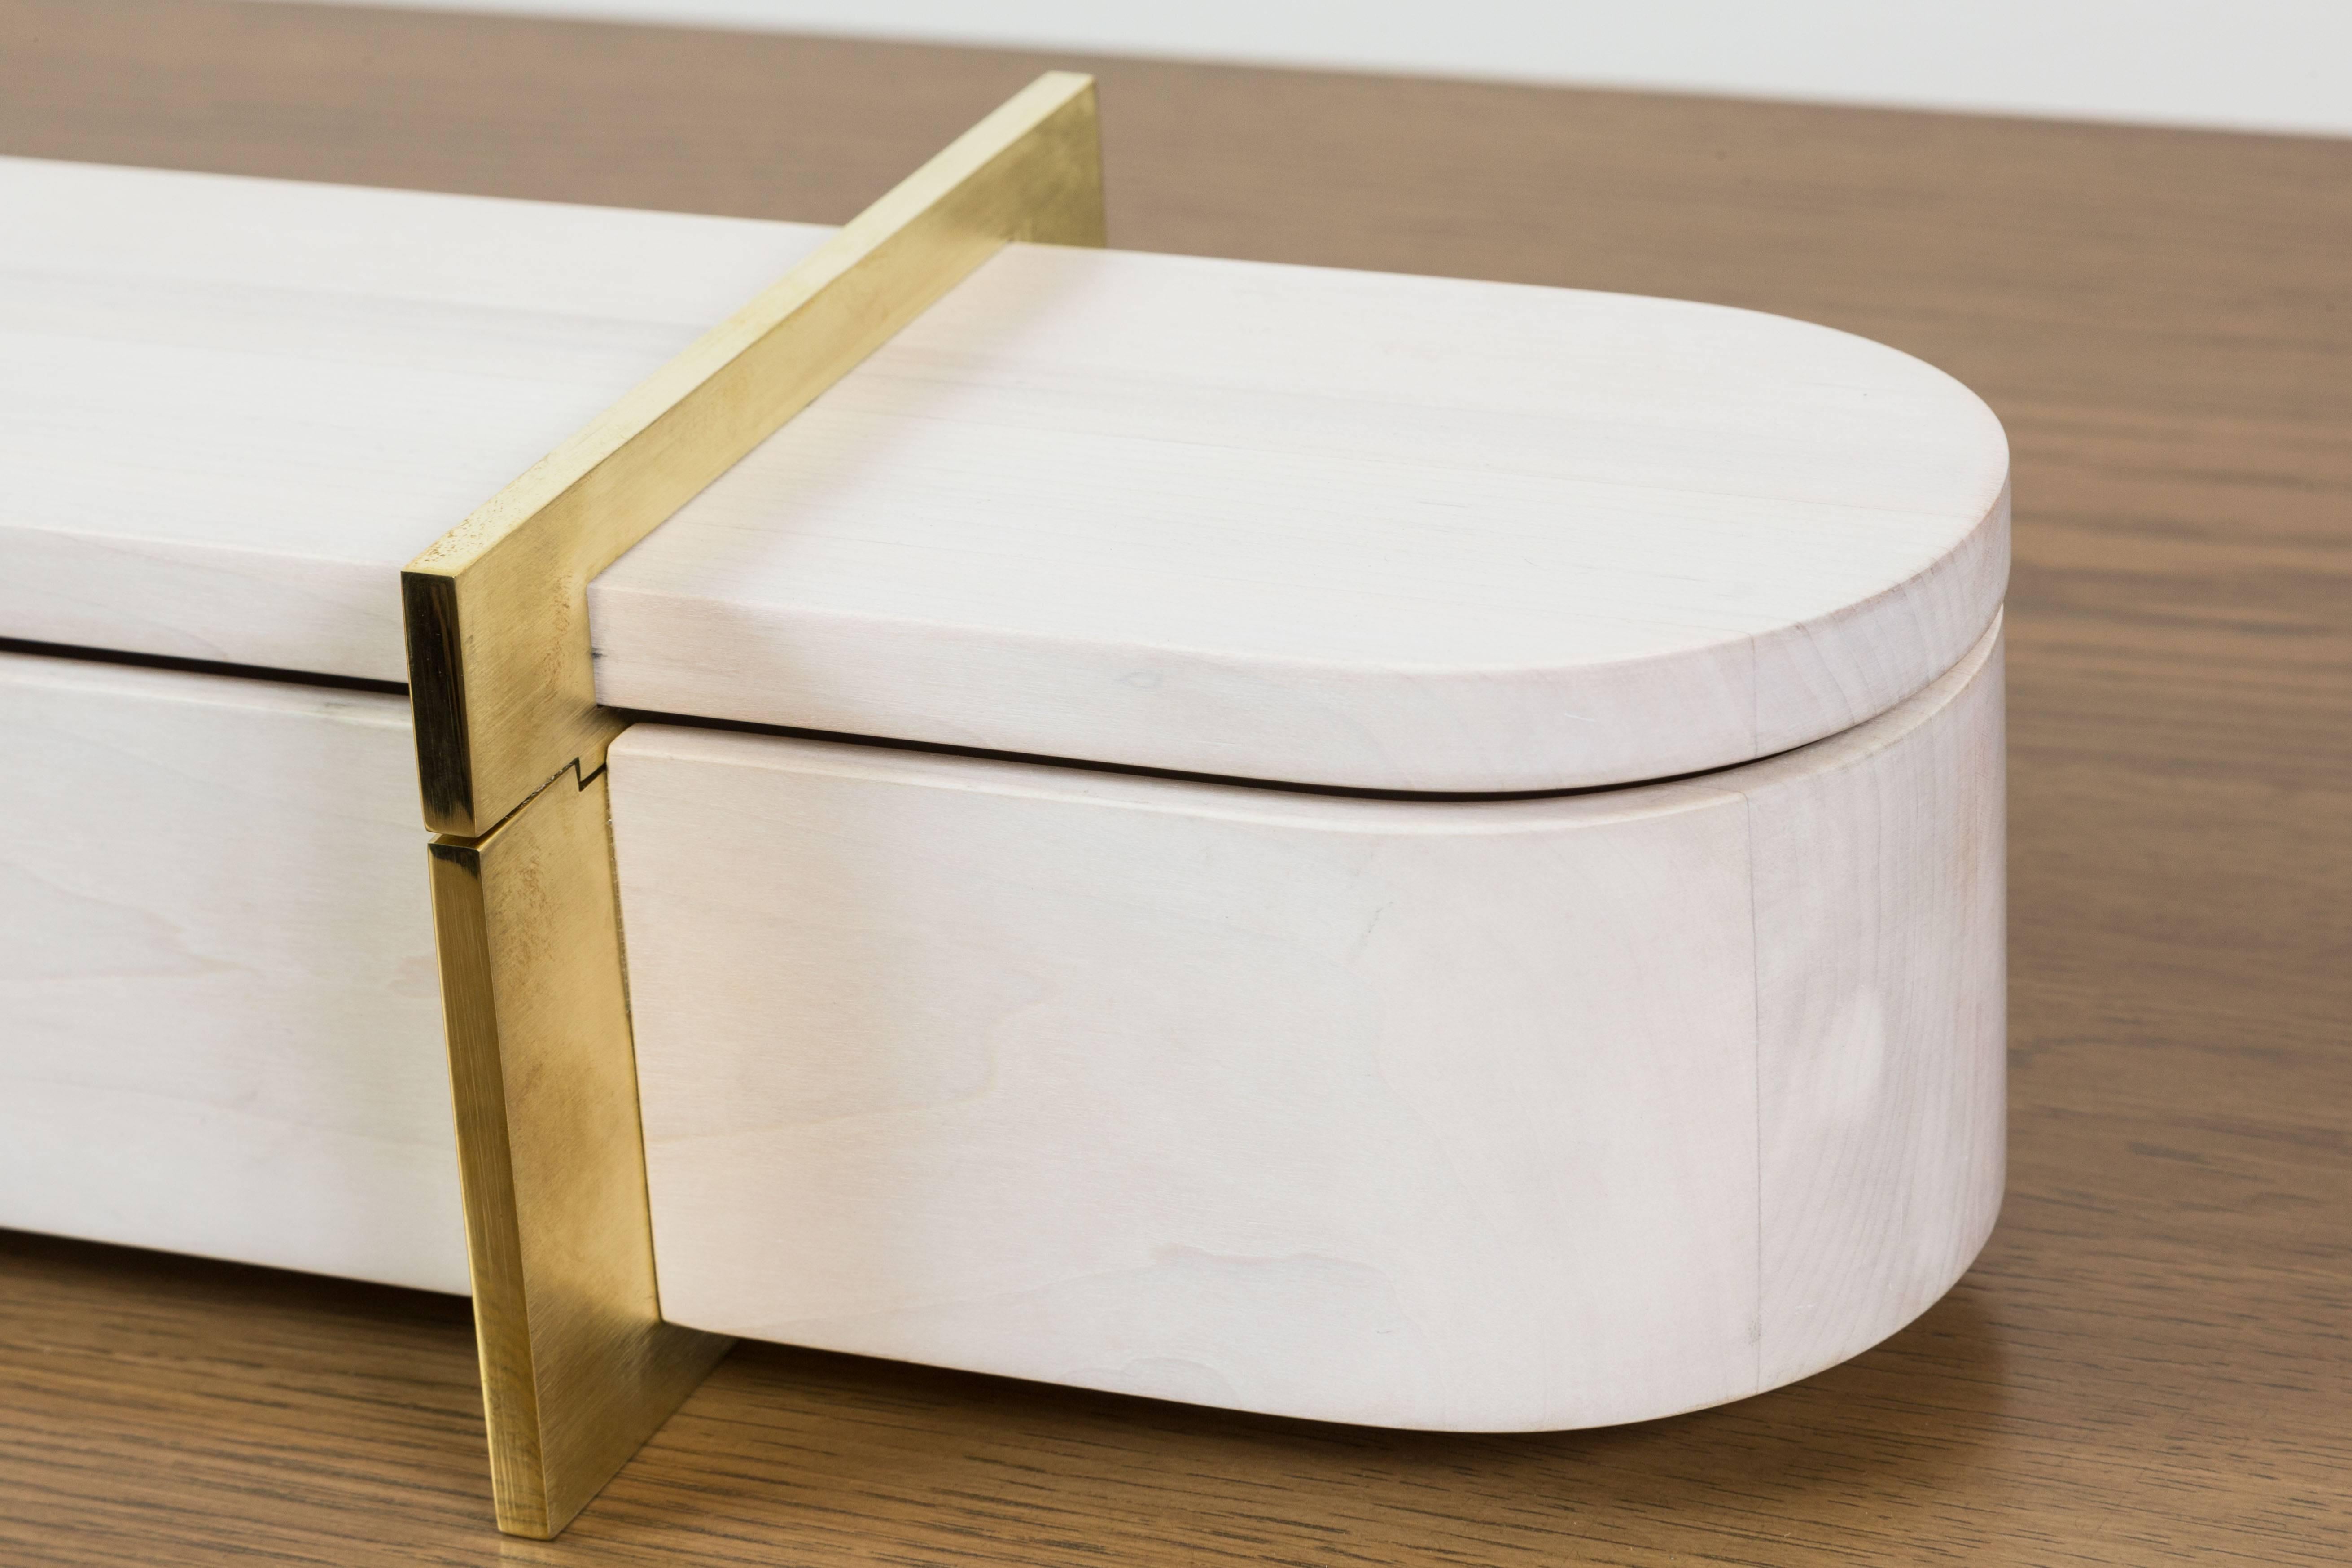 Contemporary Bleached Maple and Bras Lidded Box by Vincent Pocsik for Lawson-Fenning